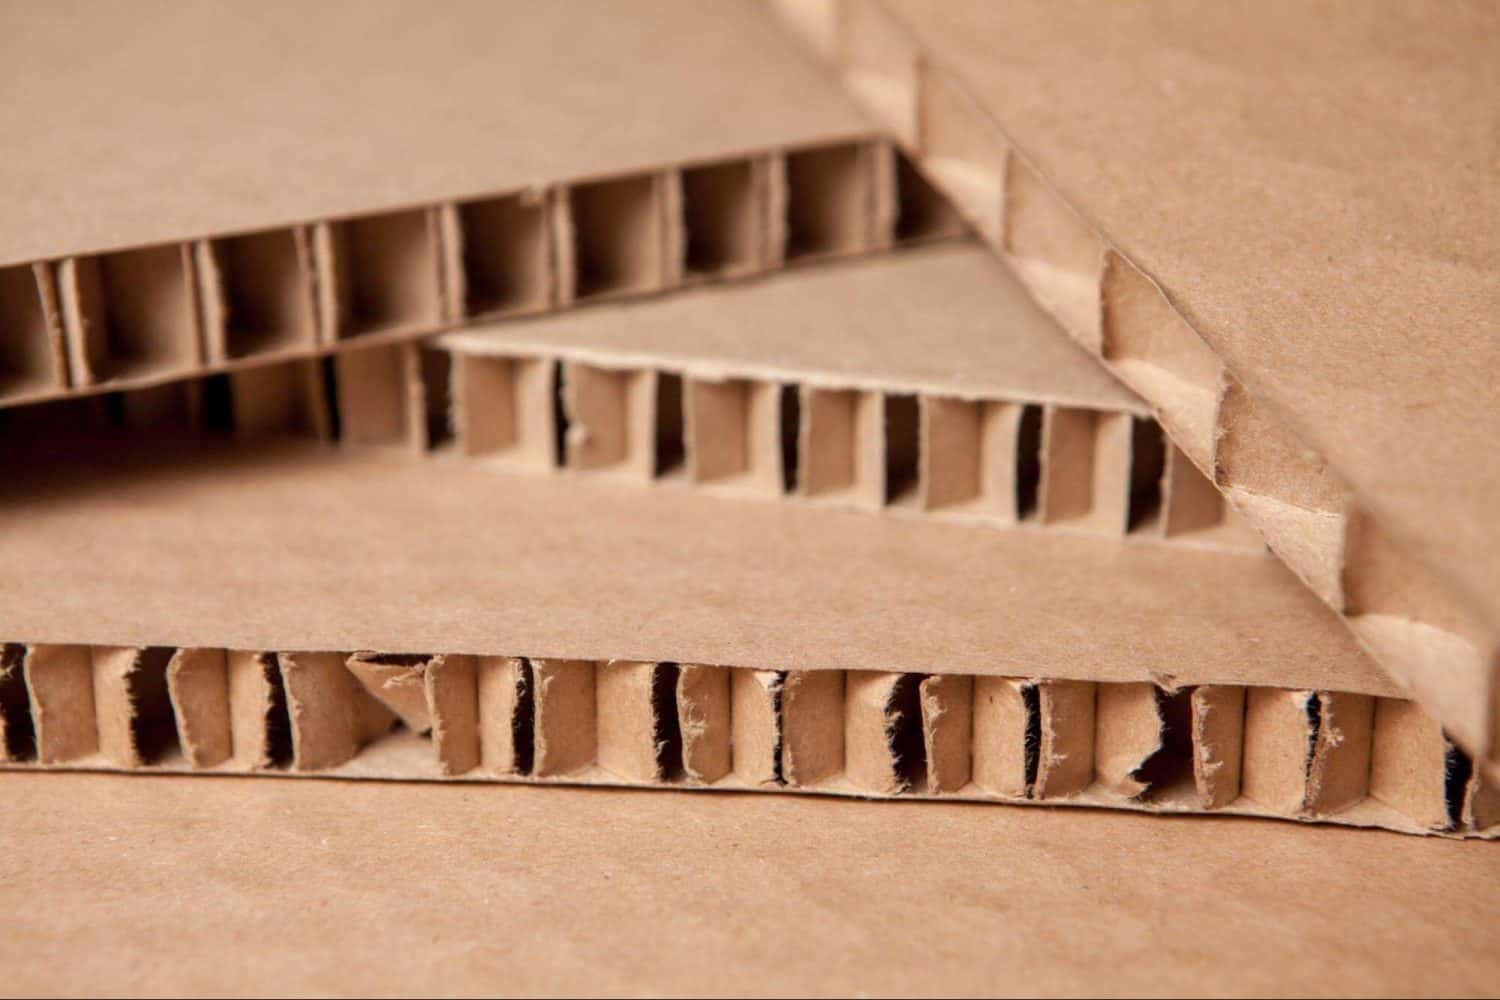 a cross section of sustainable honeycomb packaging